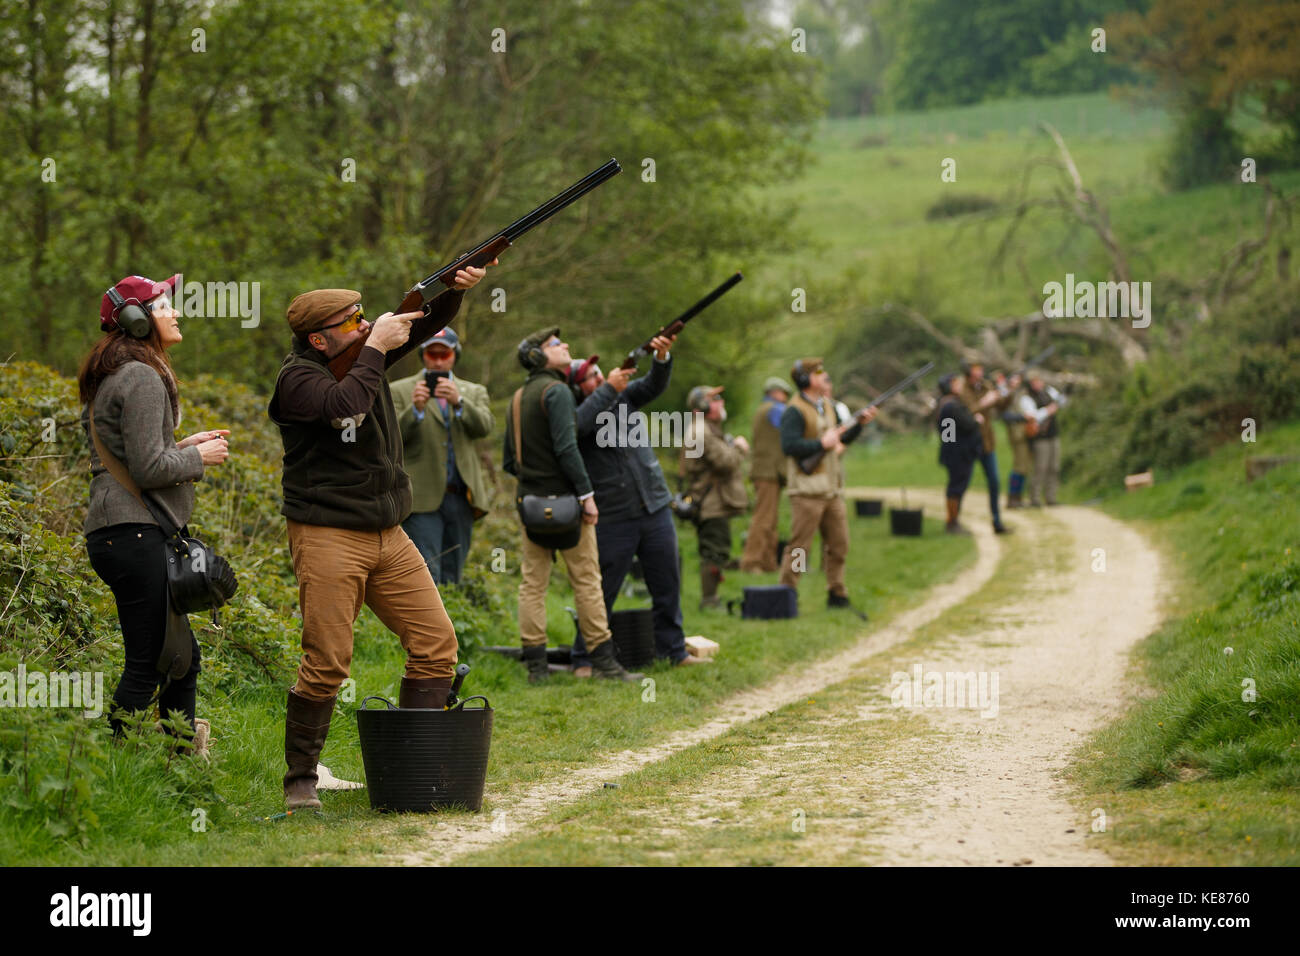 Clay pigeon shooting in a rural location Stock Photo